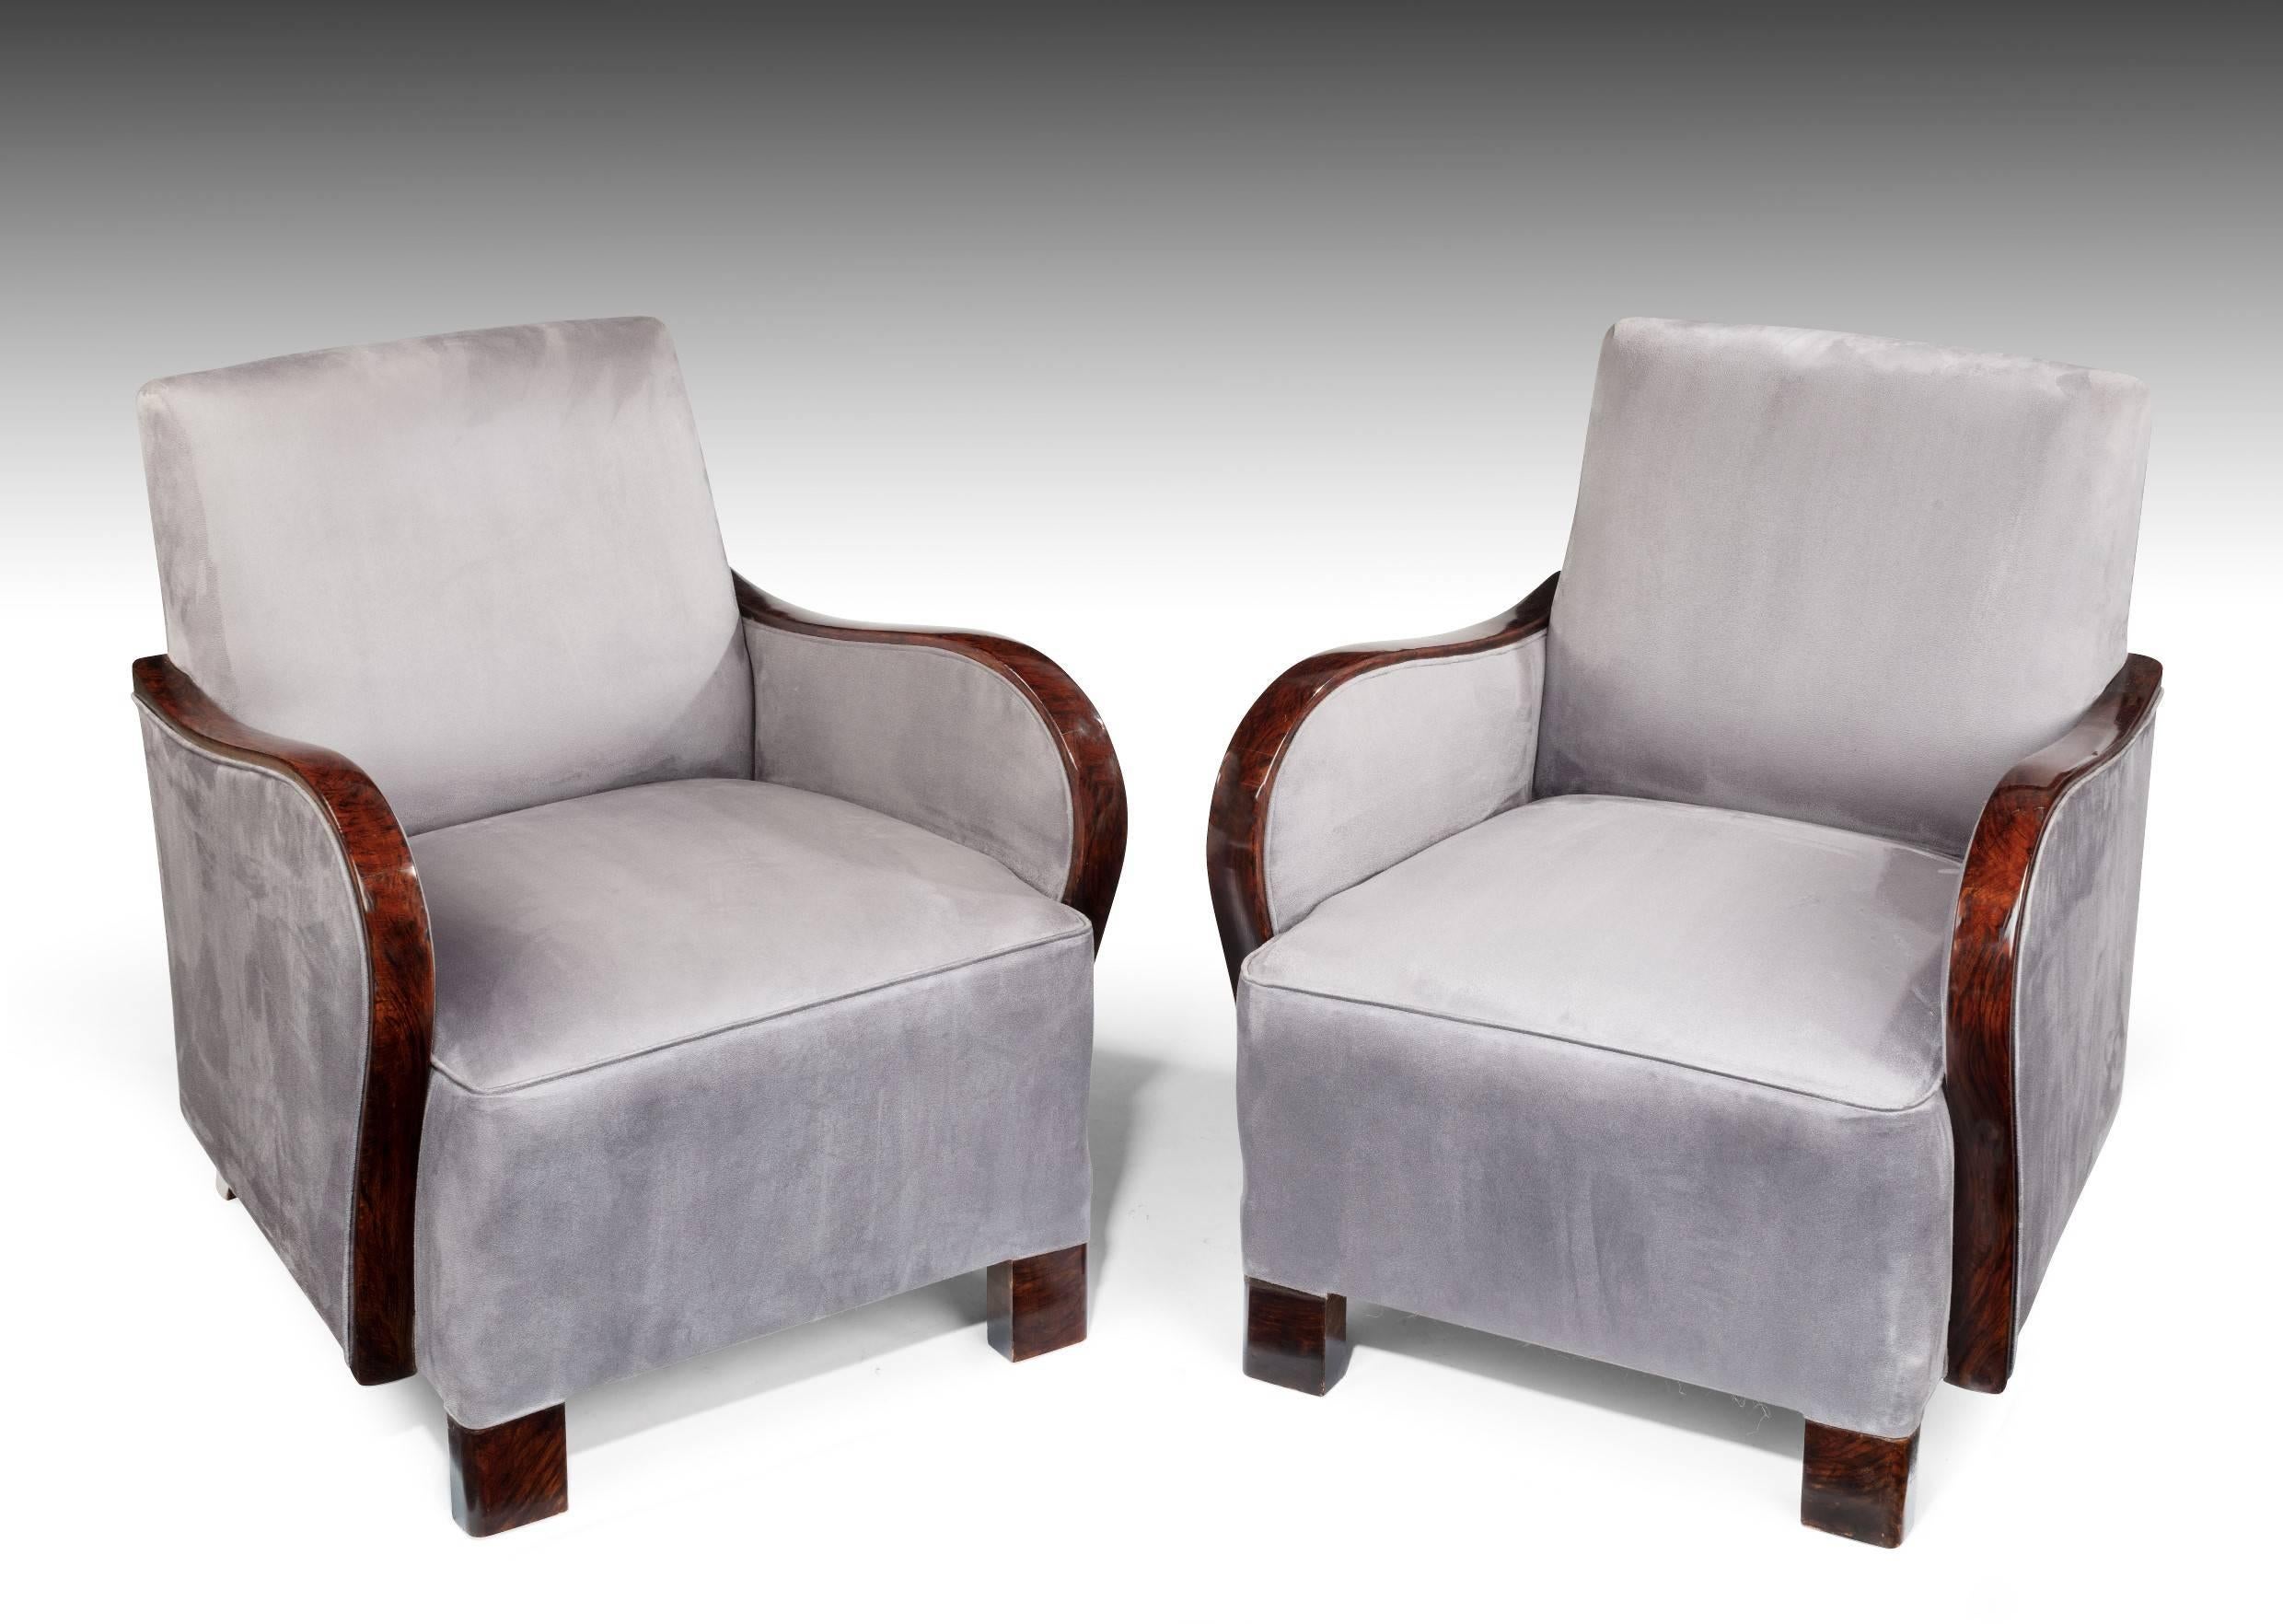 Hand-Painted Good Pair of Art Deco Armchairs